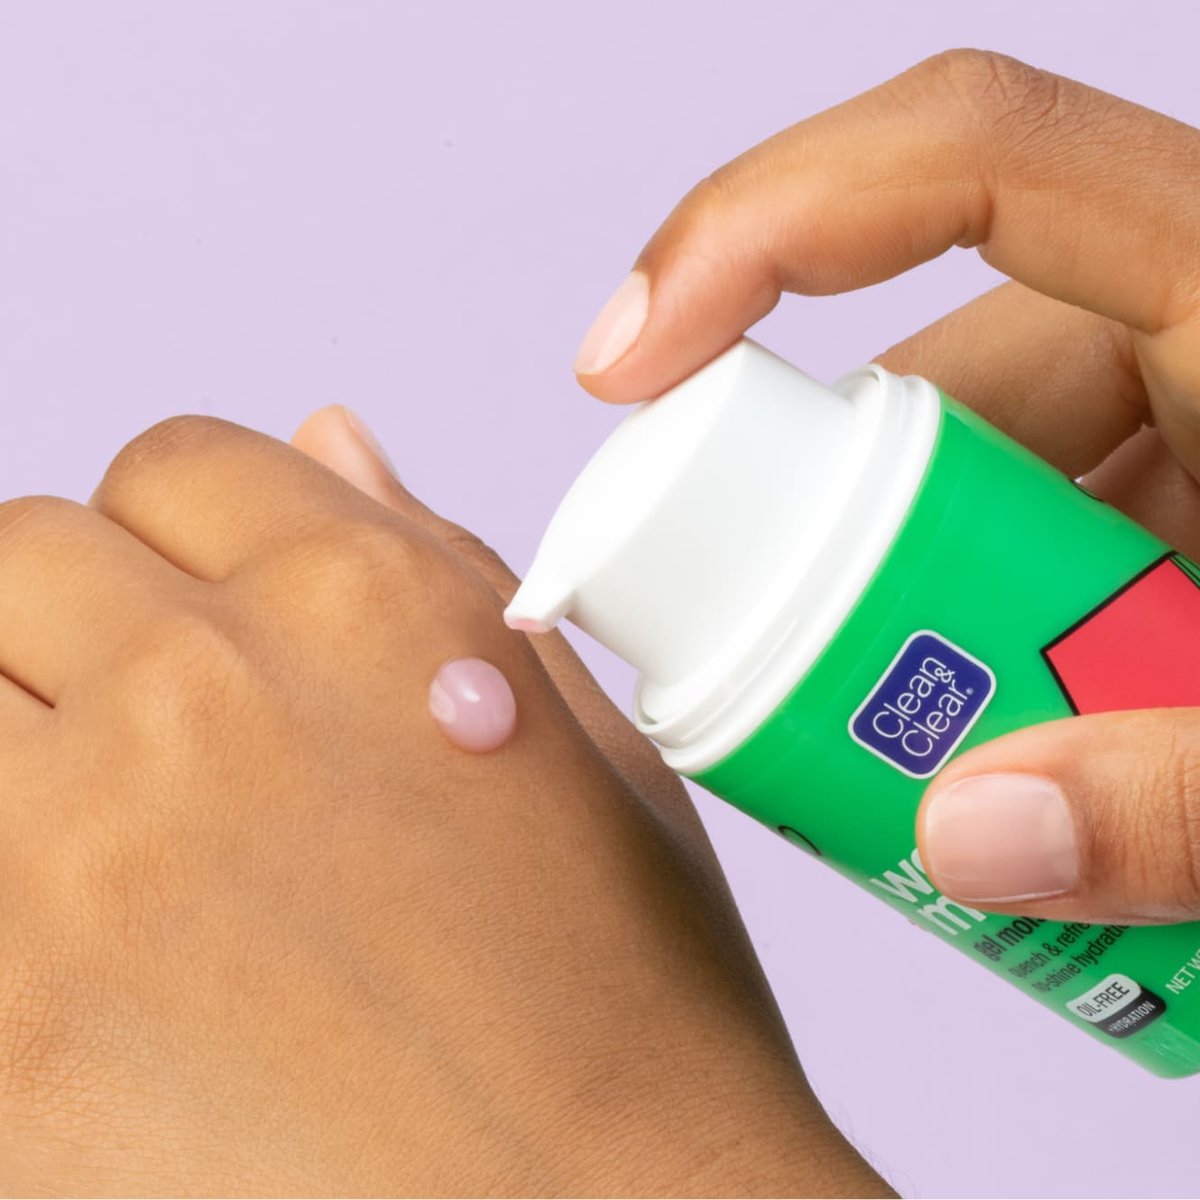 Drop of watermelon gel moisturizer is pumped from green bottle with white top onto back of fisted hand in front of light purple background